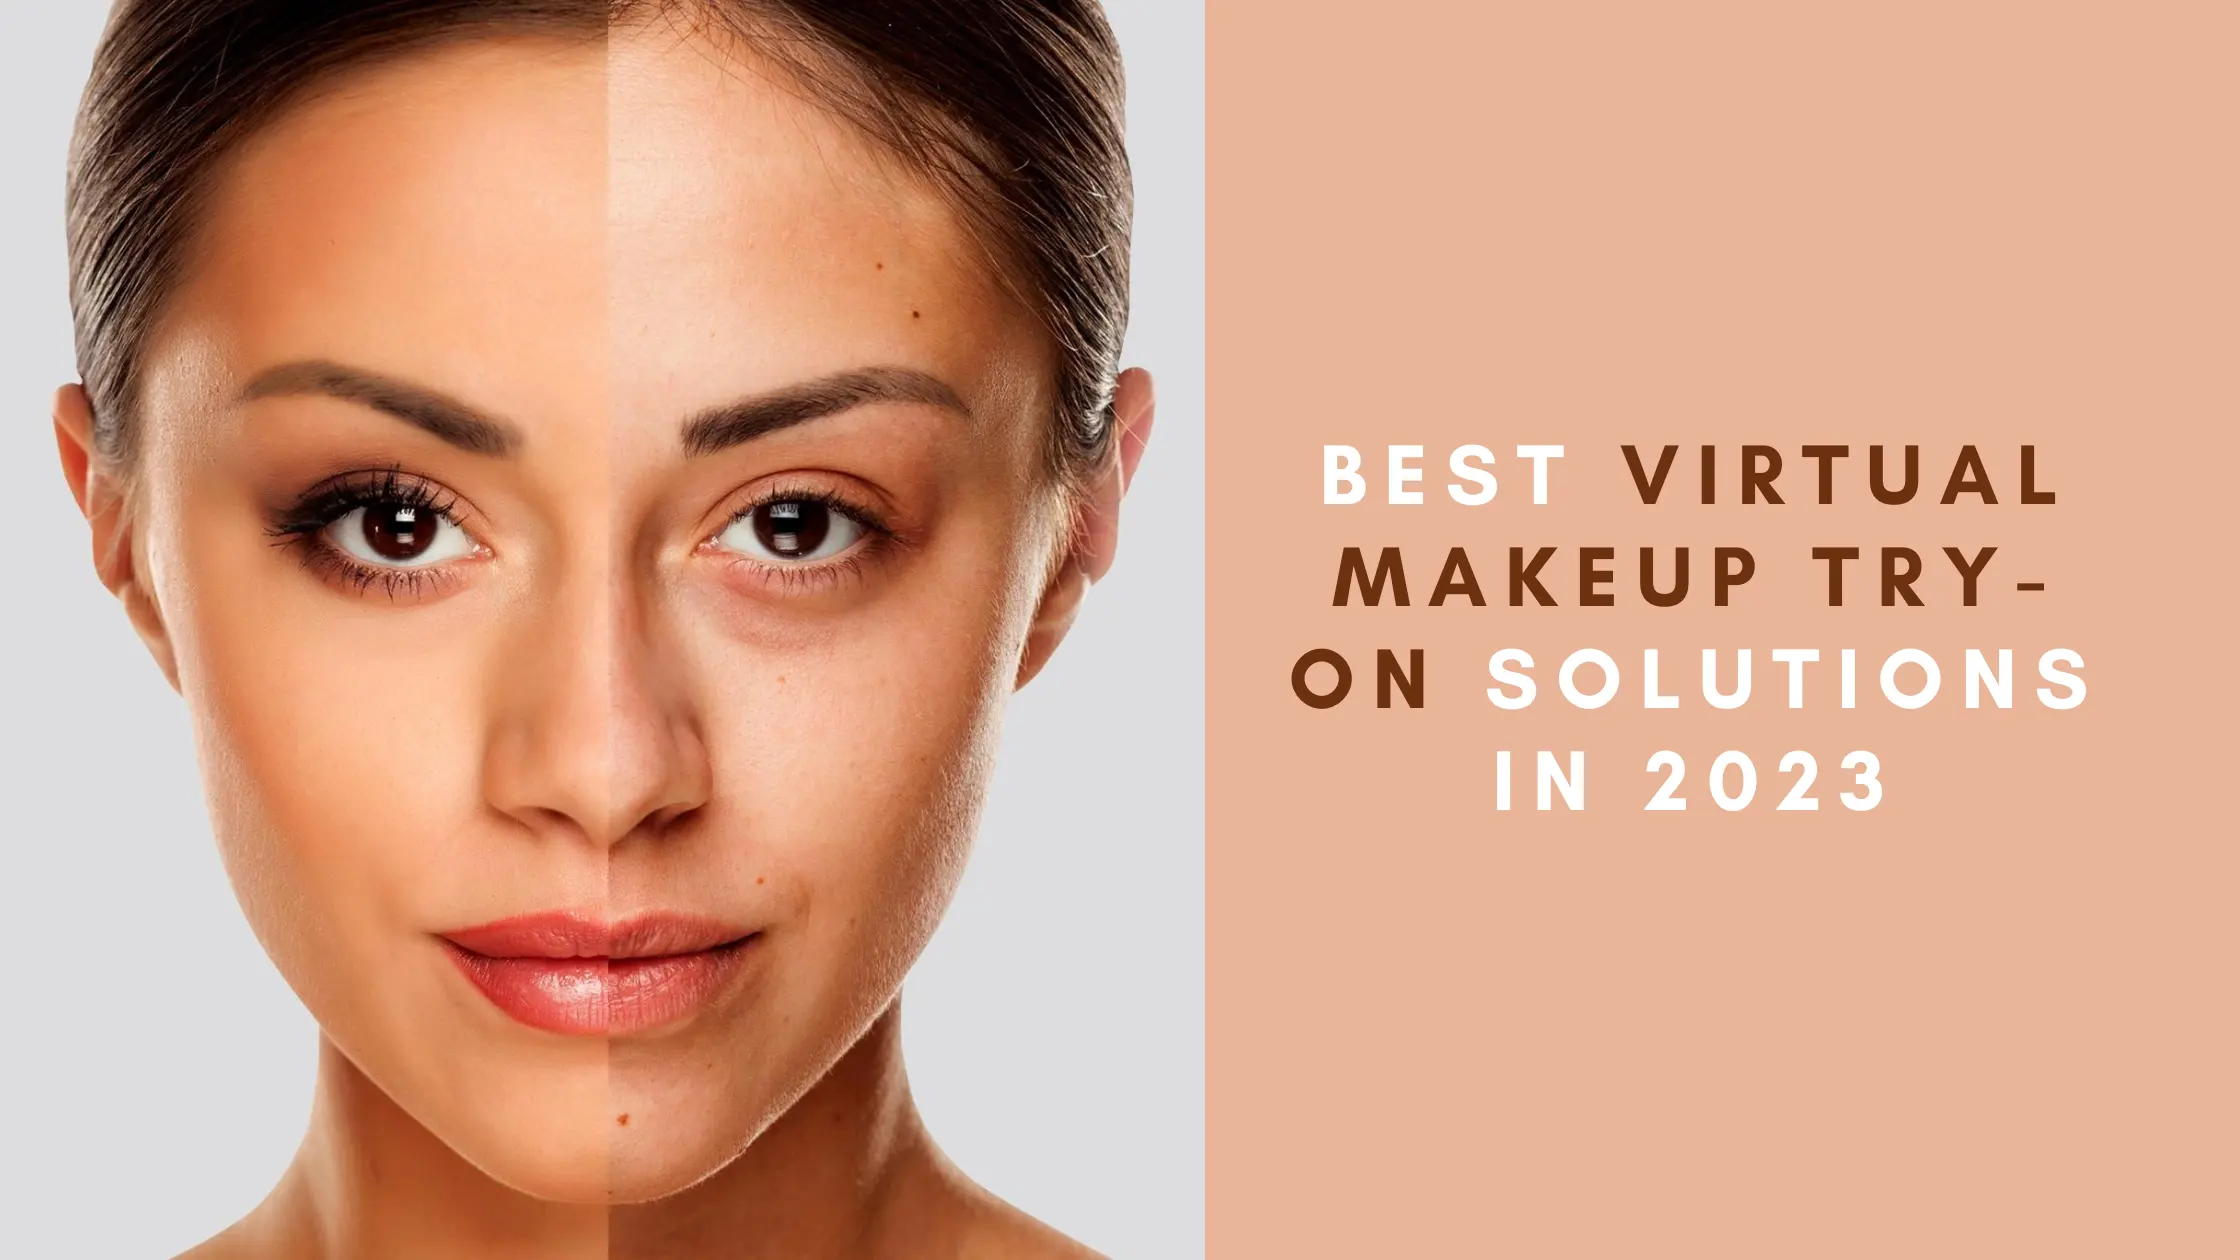 5 best virtual makeup try-on solutions in 2023 and how to choose the right one for your brand